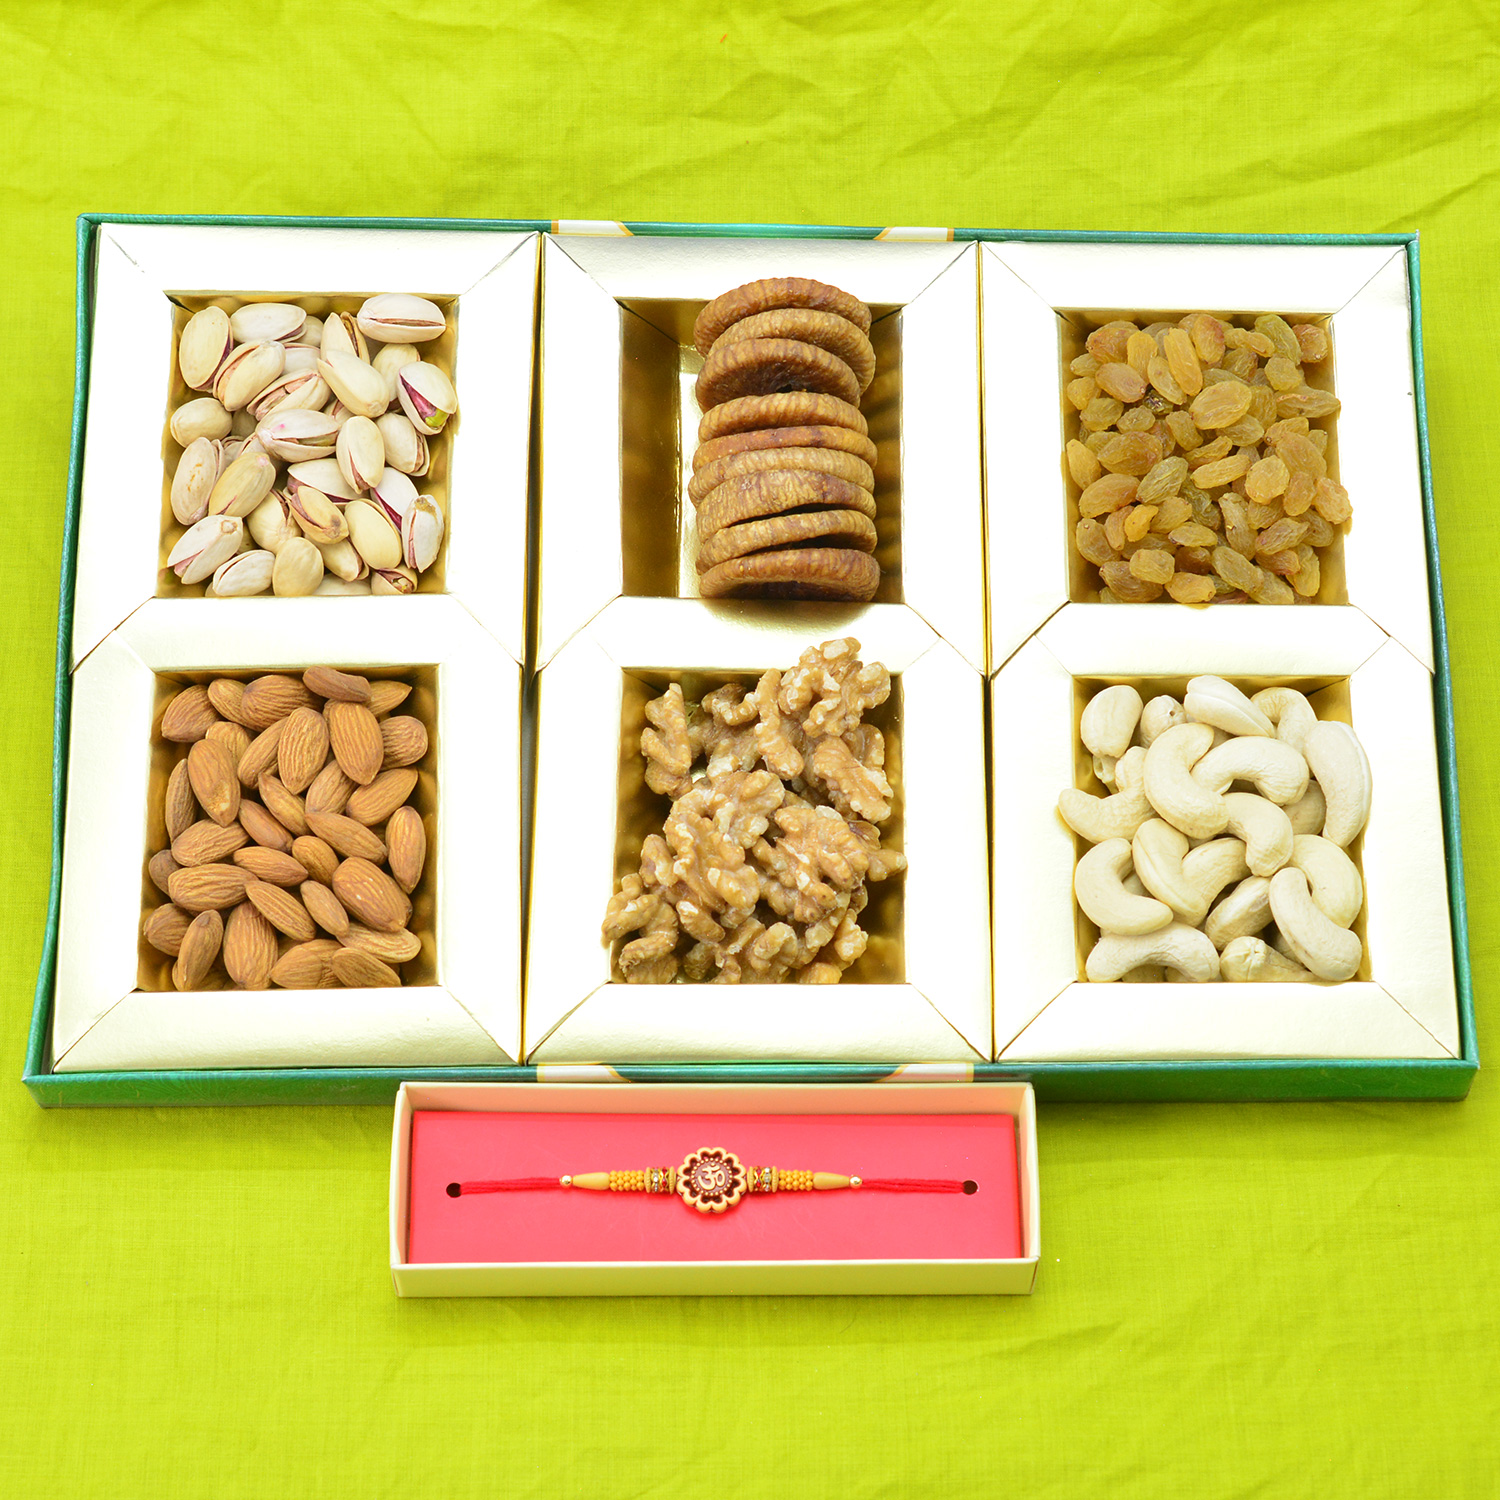 Om Divines Sandalwood Rakhi for Brother with Fresh 6 Types of Dry Fruits